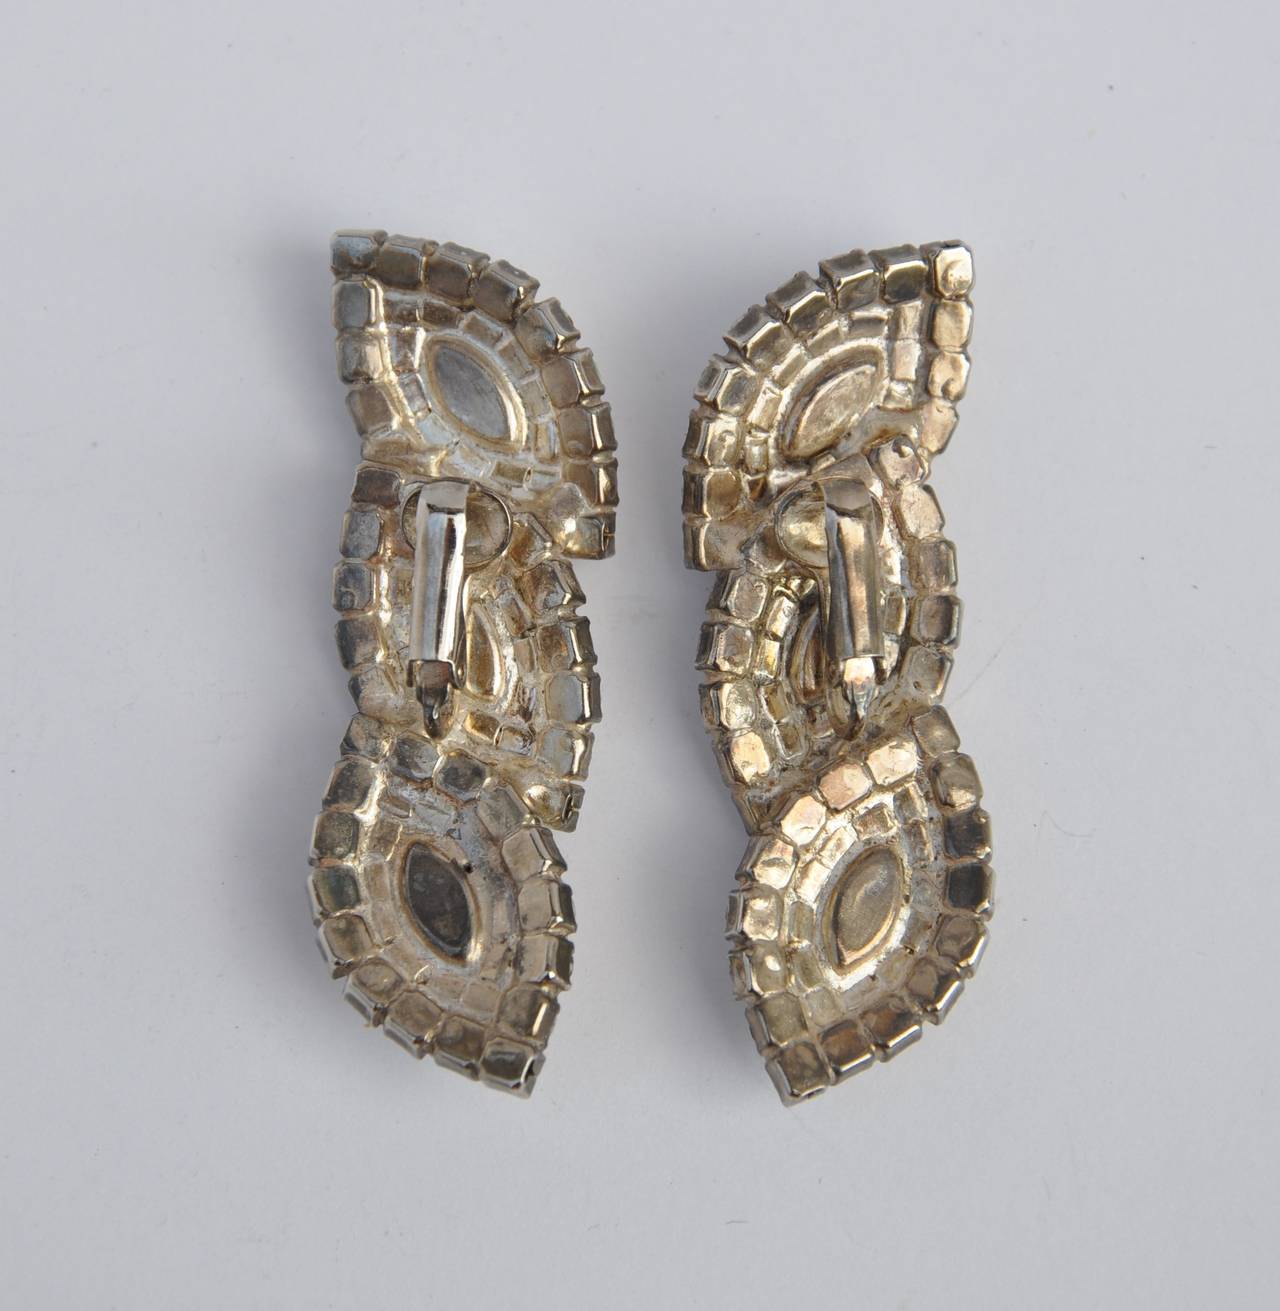 Elegant Evening Multi-Rhinestones Drop Ear Clips In Good Condition For Sale In New York, NY